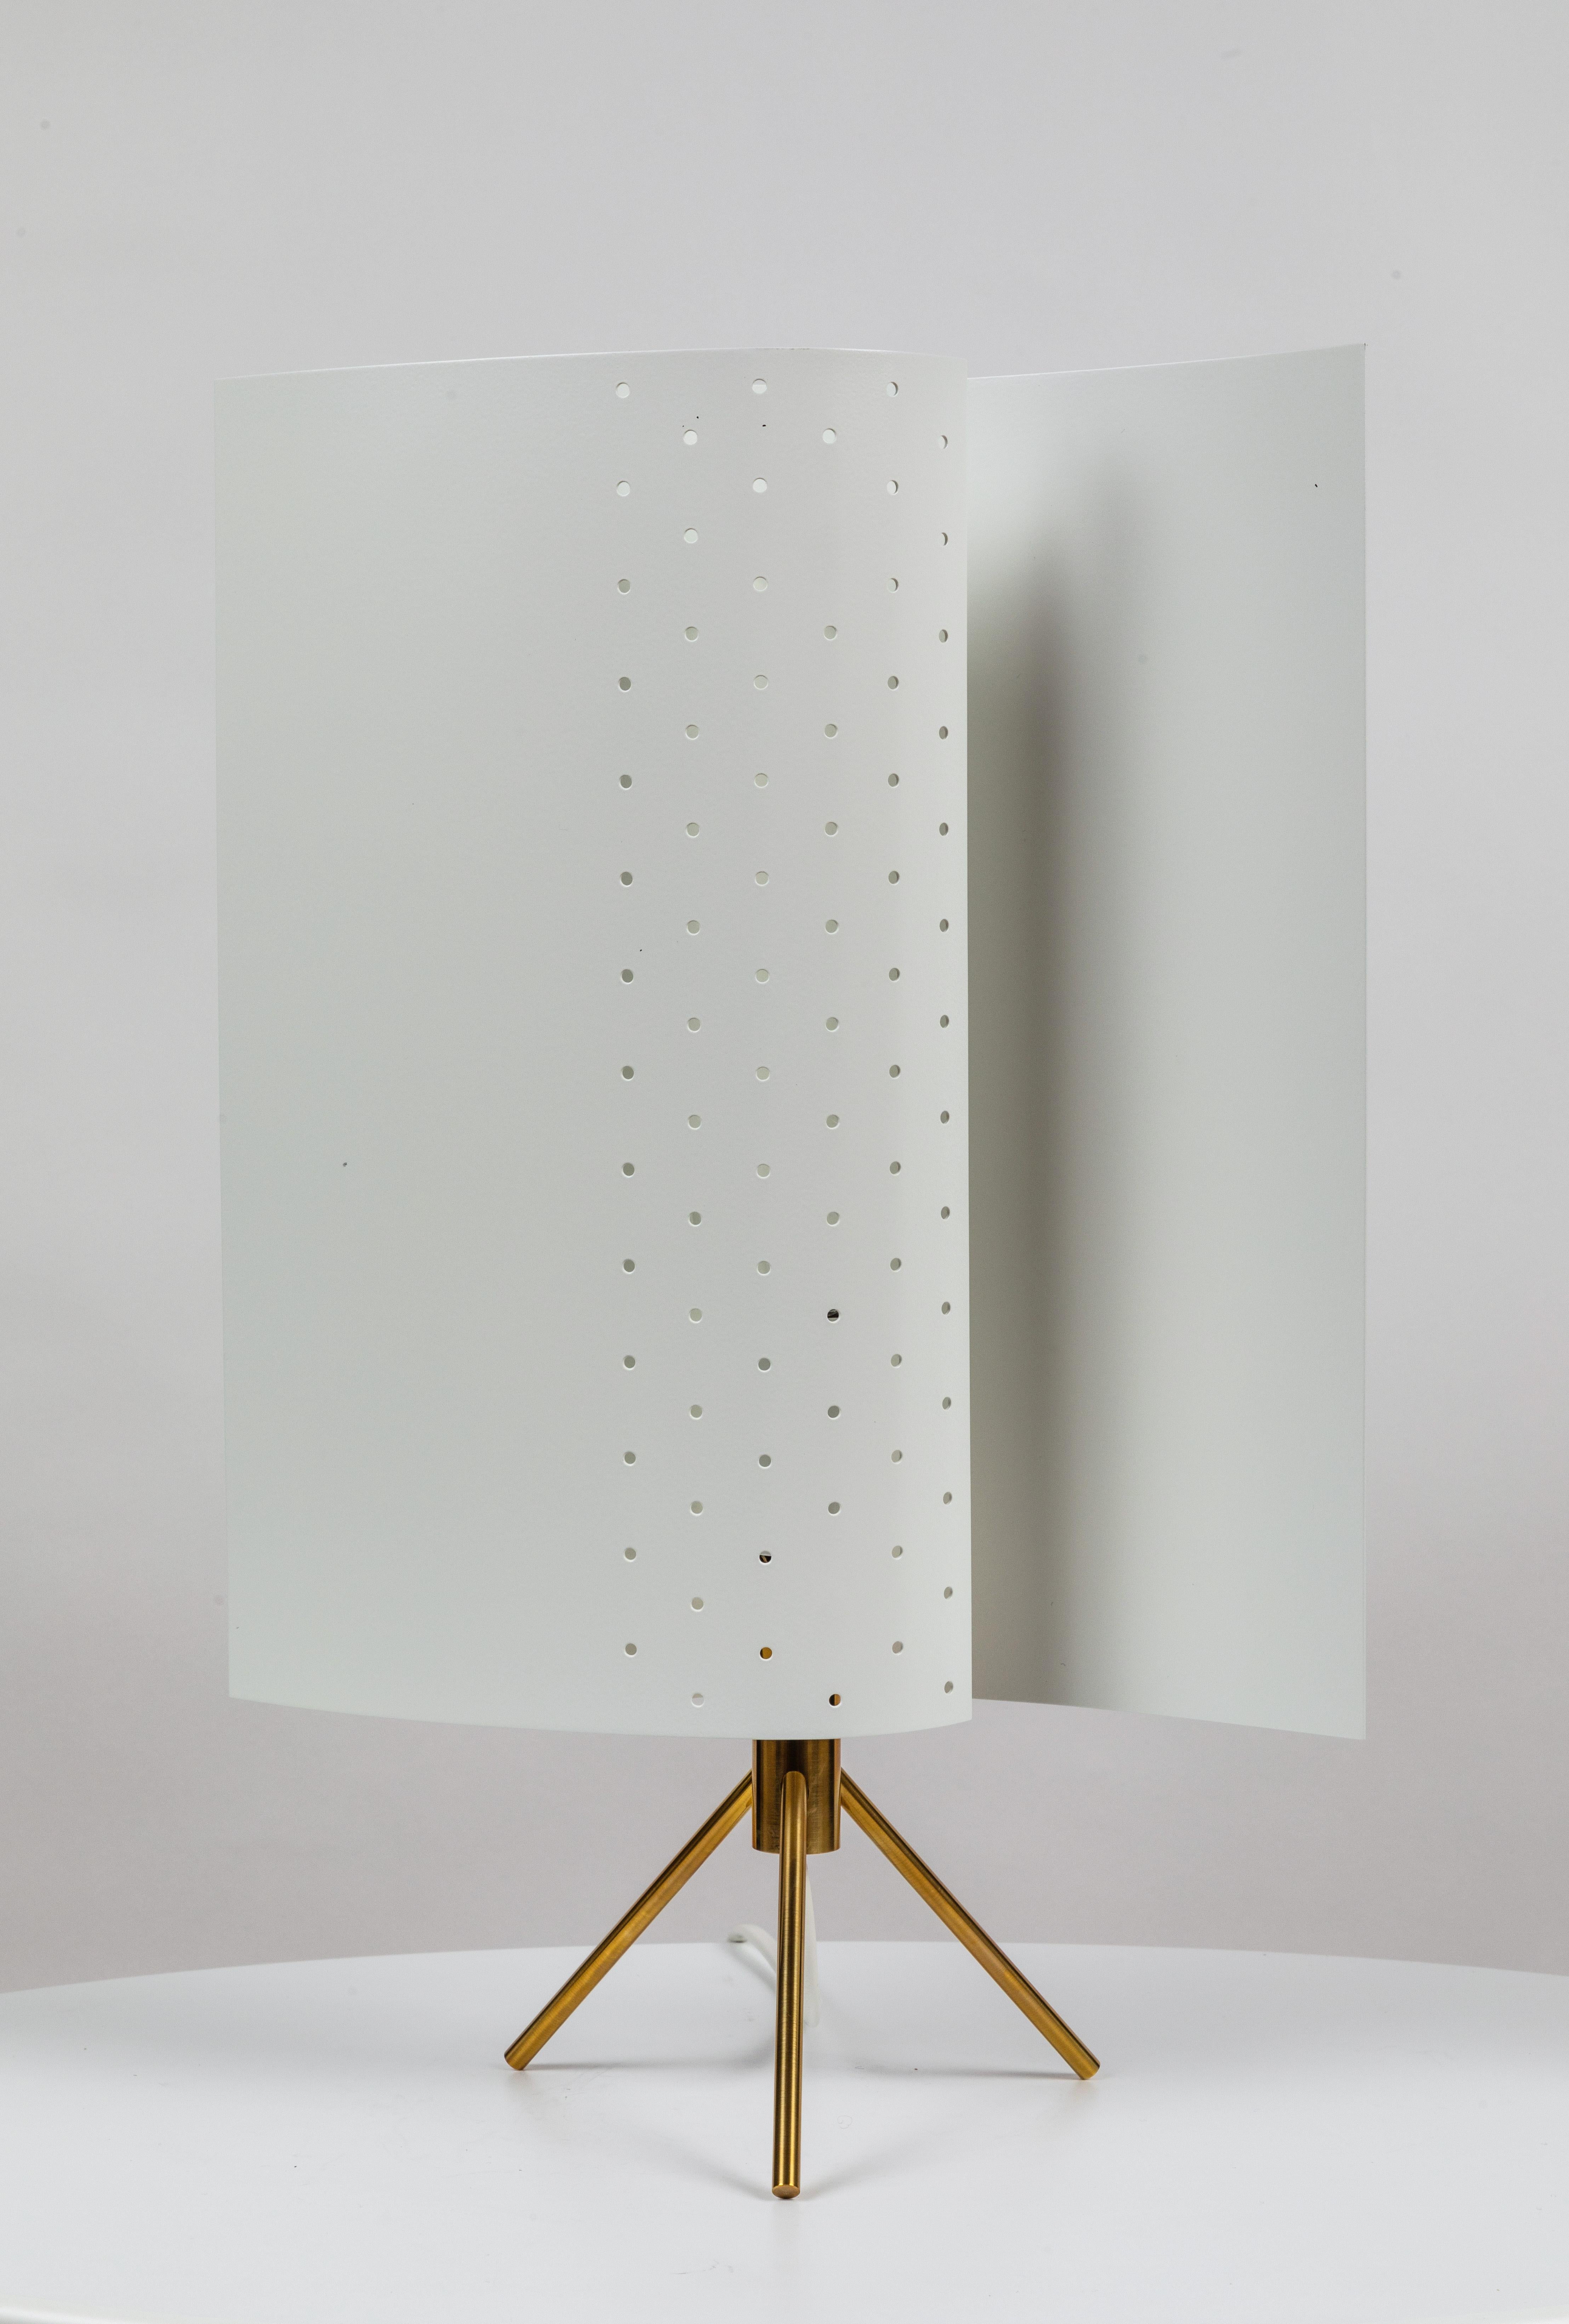 Michel buffet model #B207 white table lamp. This authorized edition is still made by Michel Buffet in France with many of the same small-scale manufacturing techniques and craftsmanship as his original run. Produced from a single sheet of white